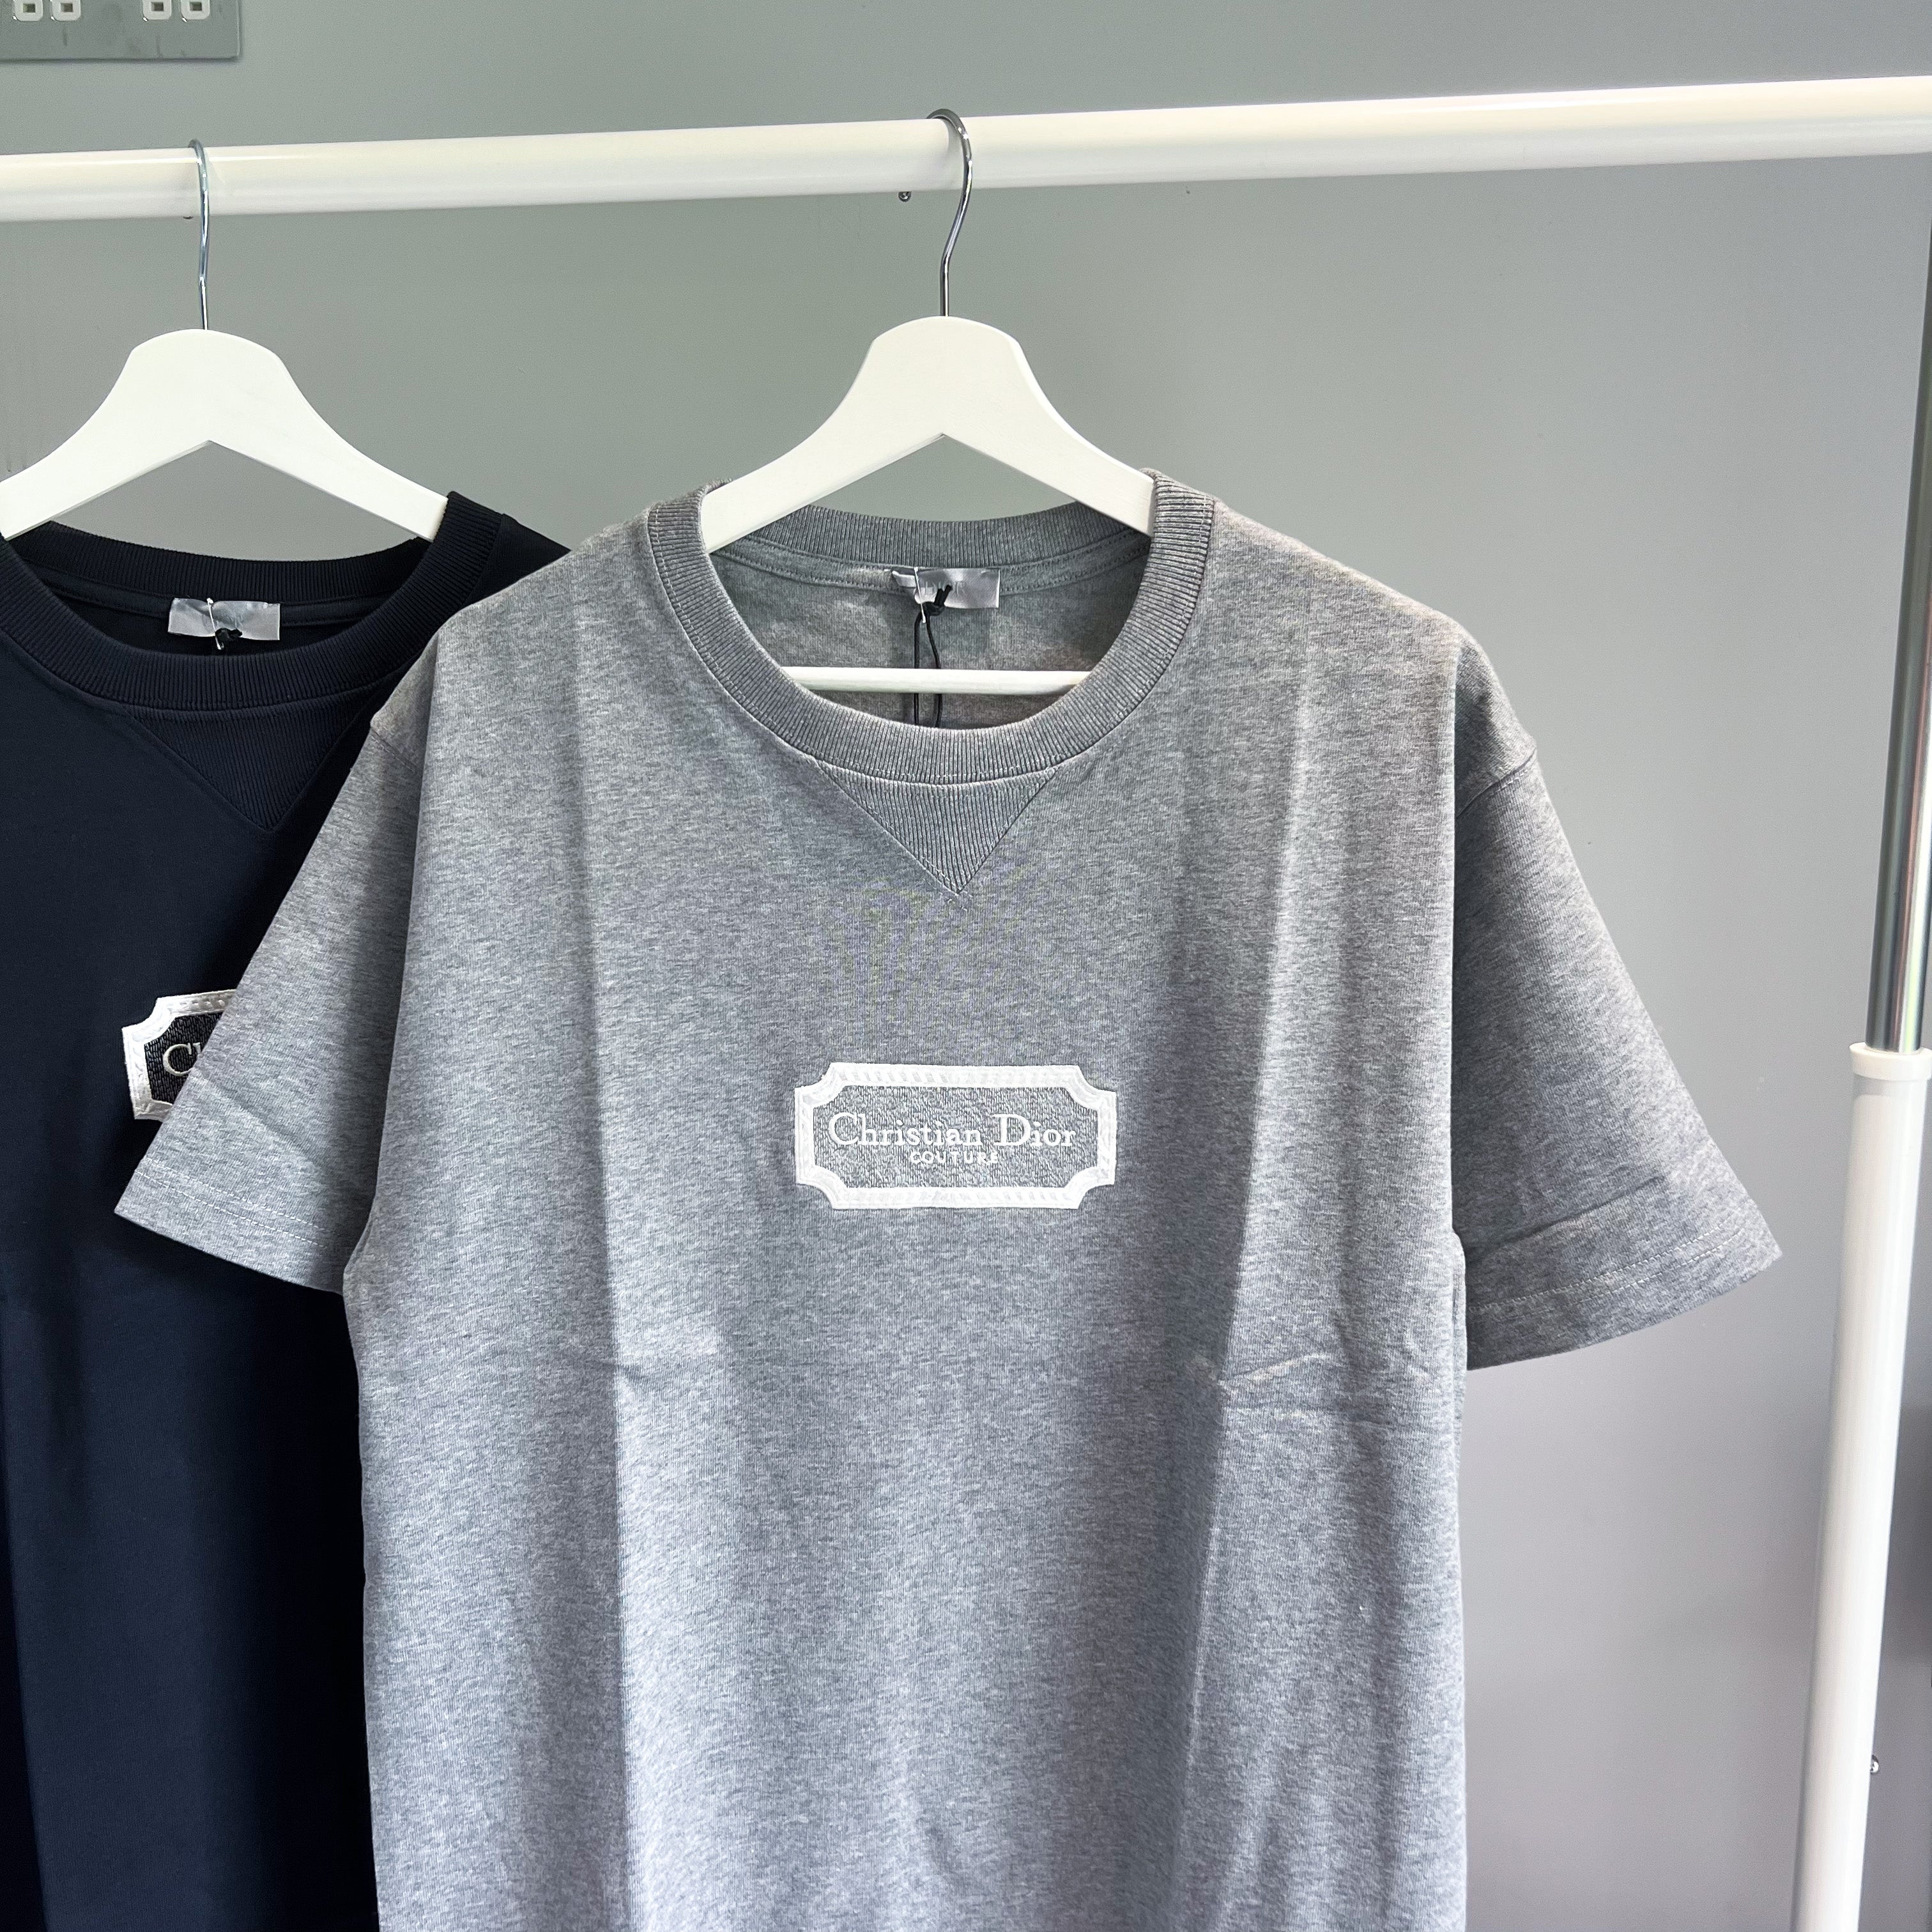 Dior Couture Tee - Light Grey